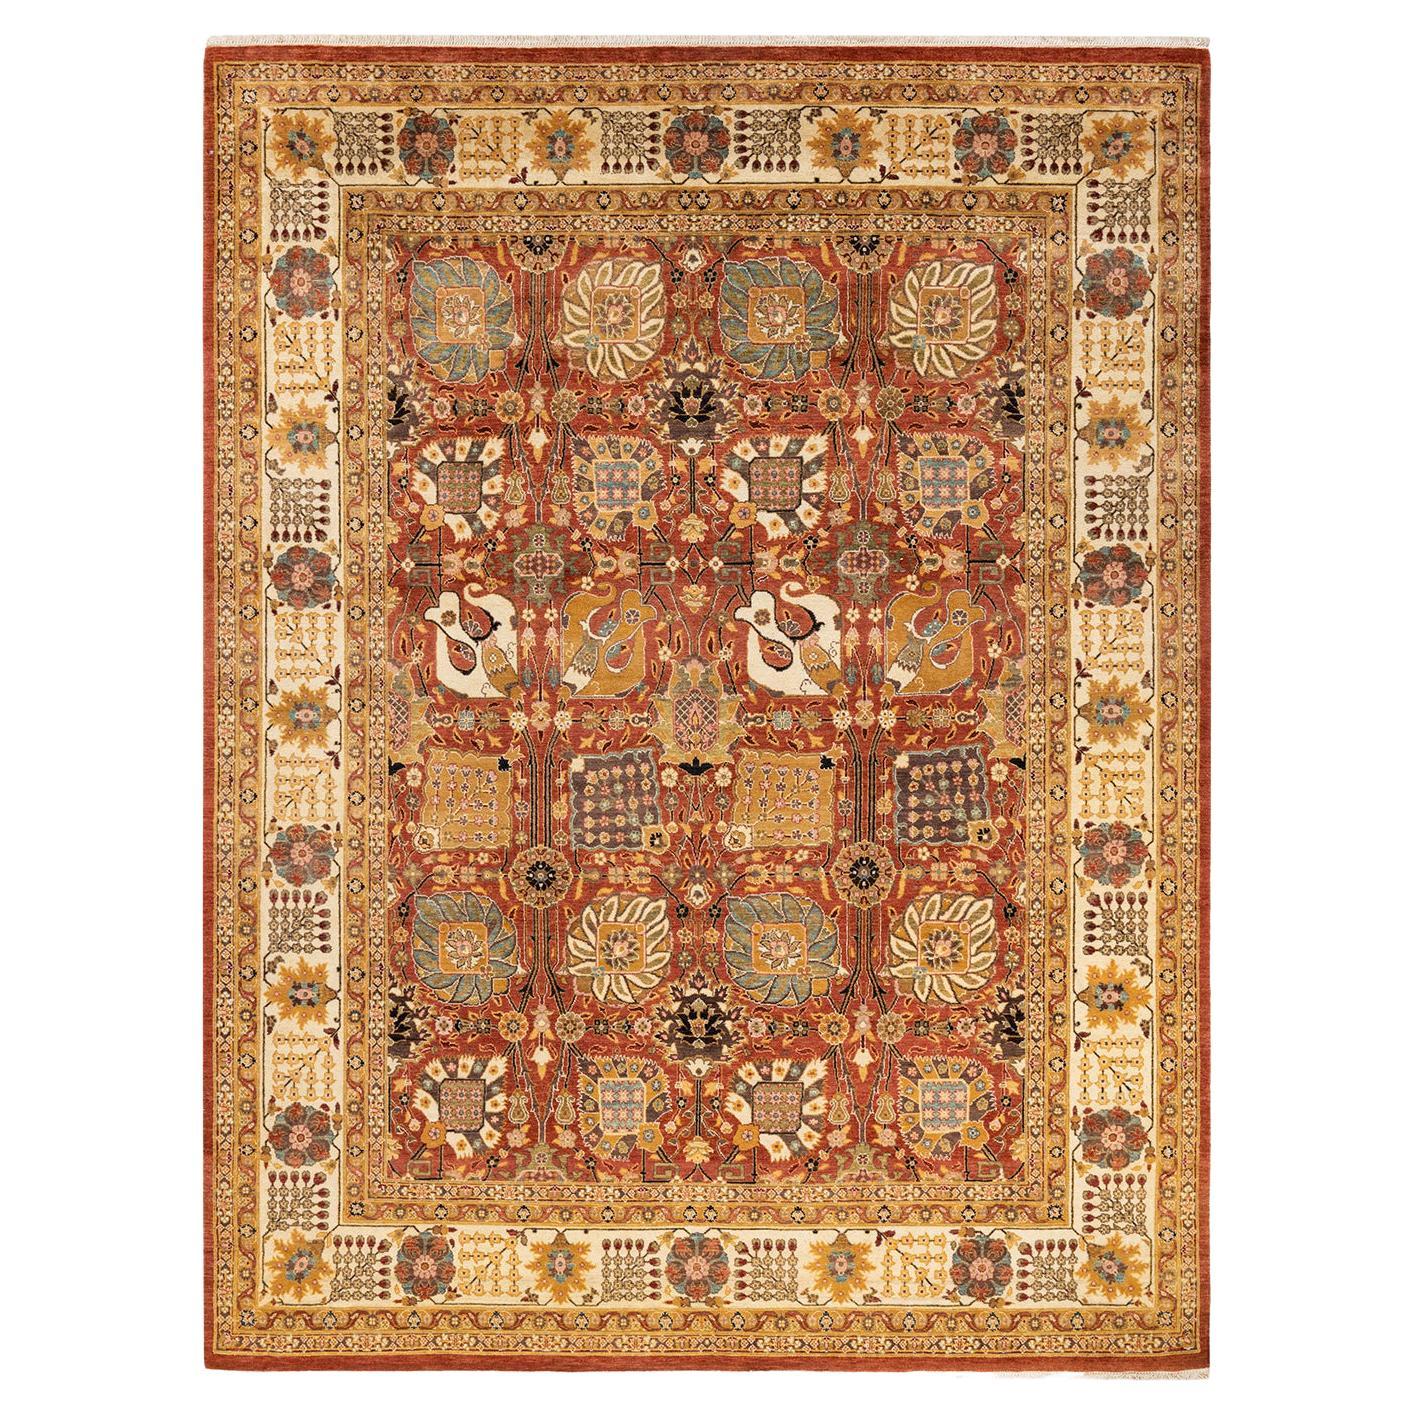 One-of-a-Kind Hand Made Contemporary Eclectic Pink Area Rug